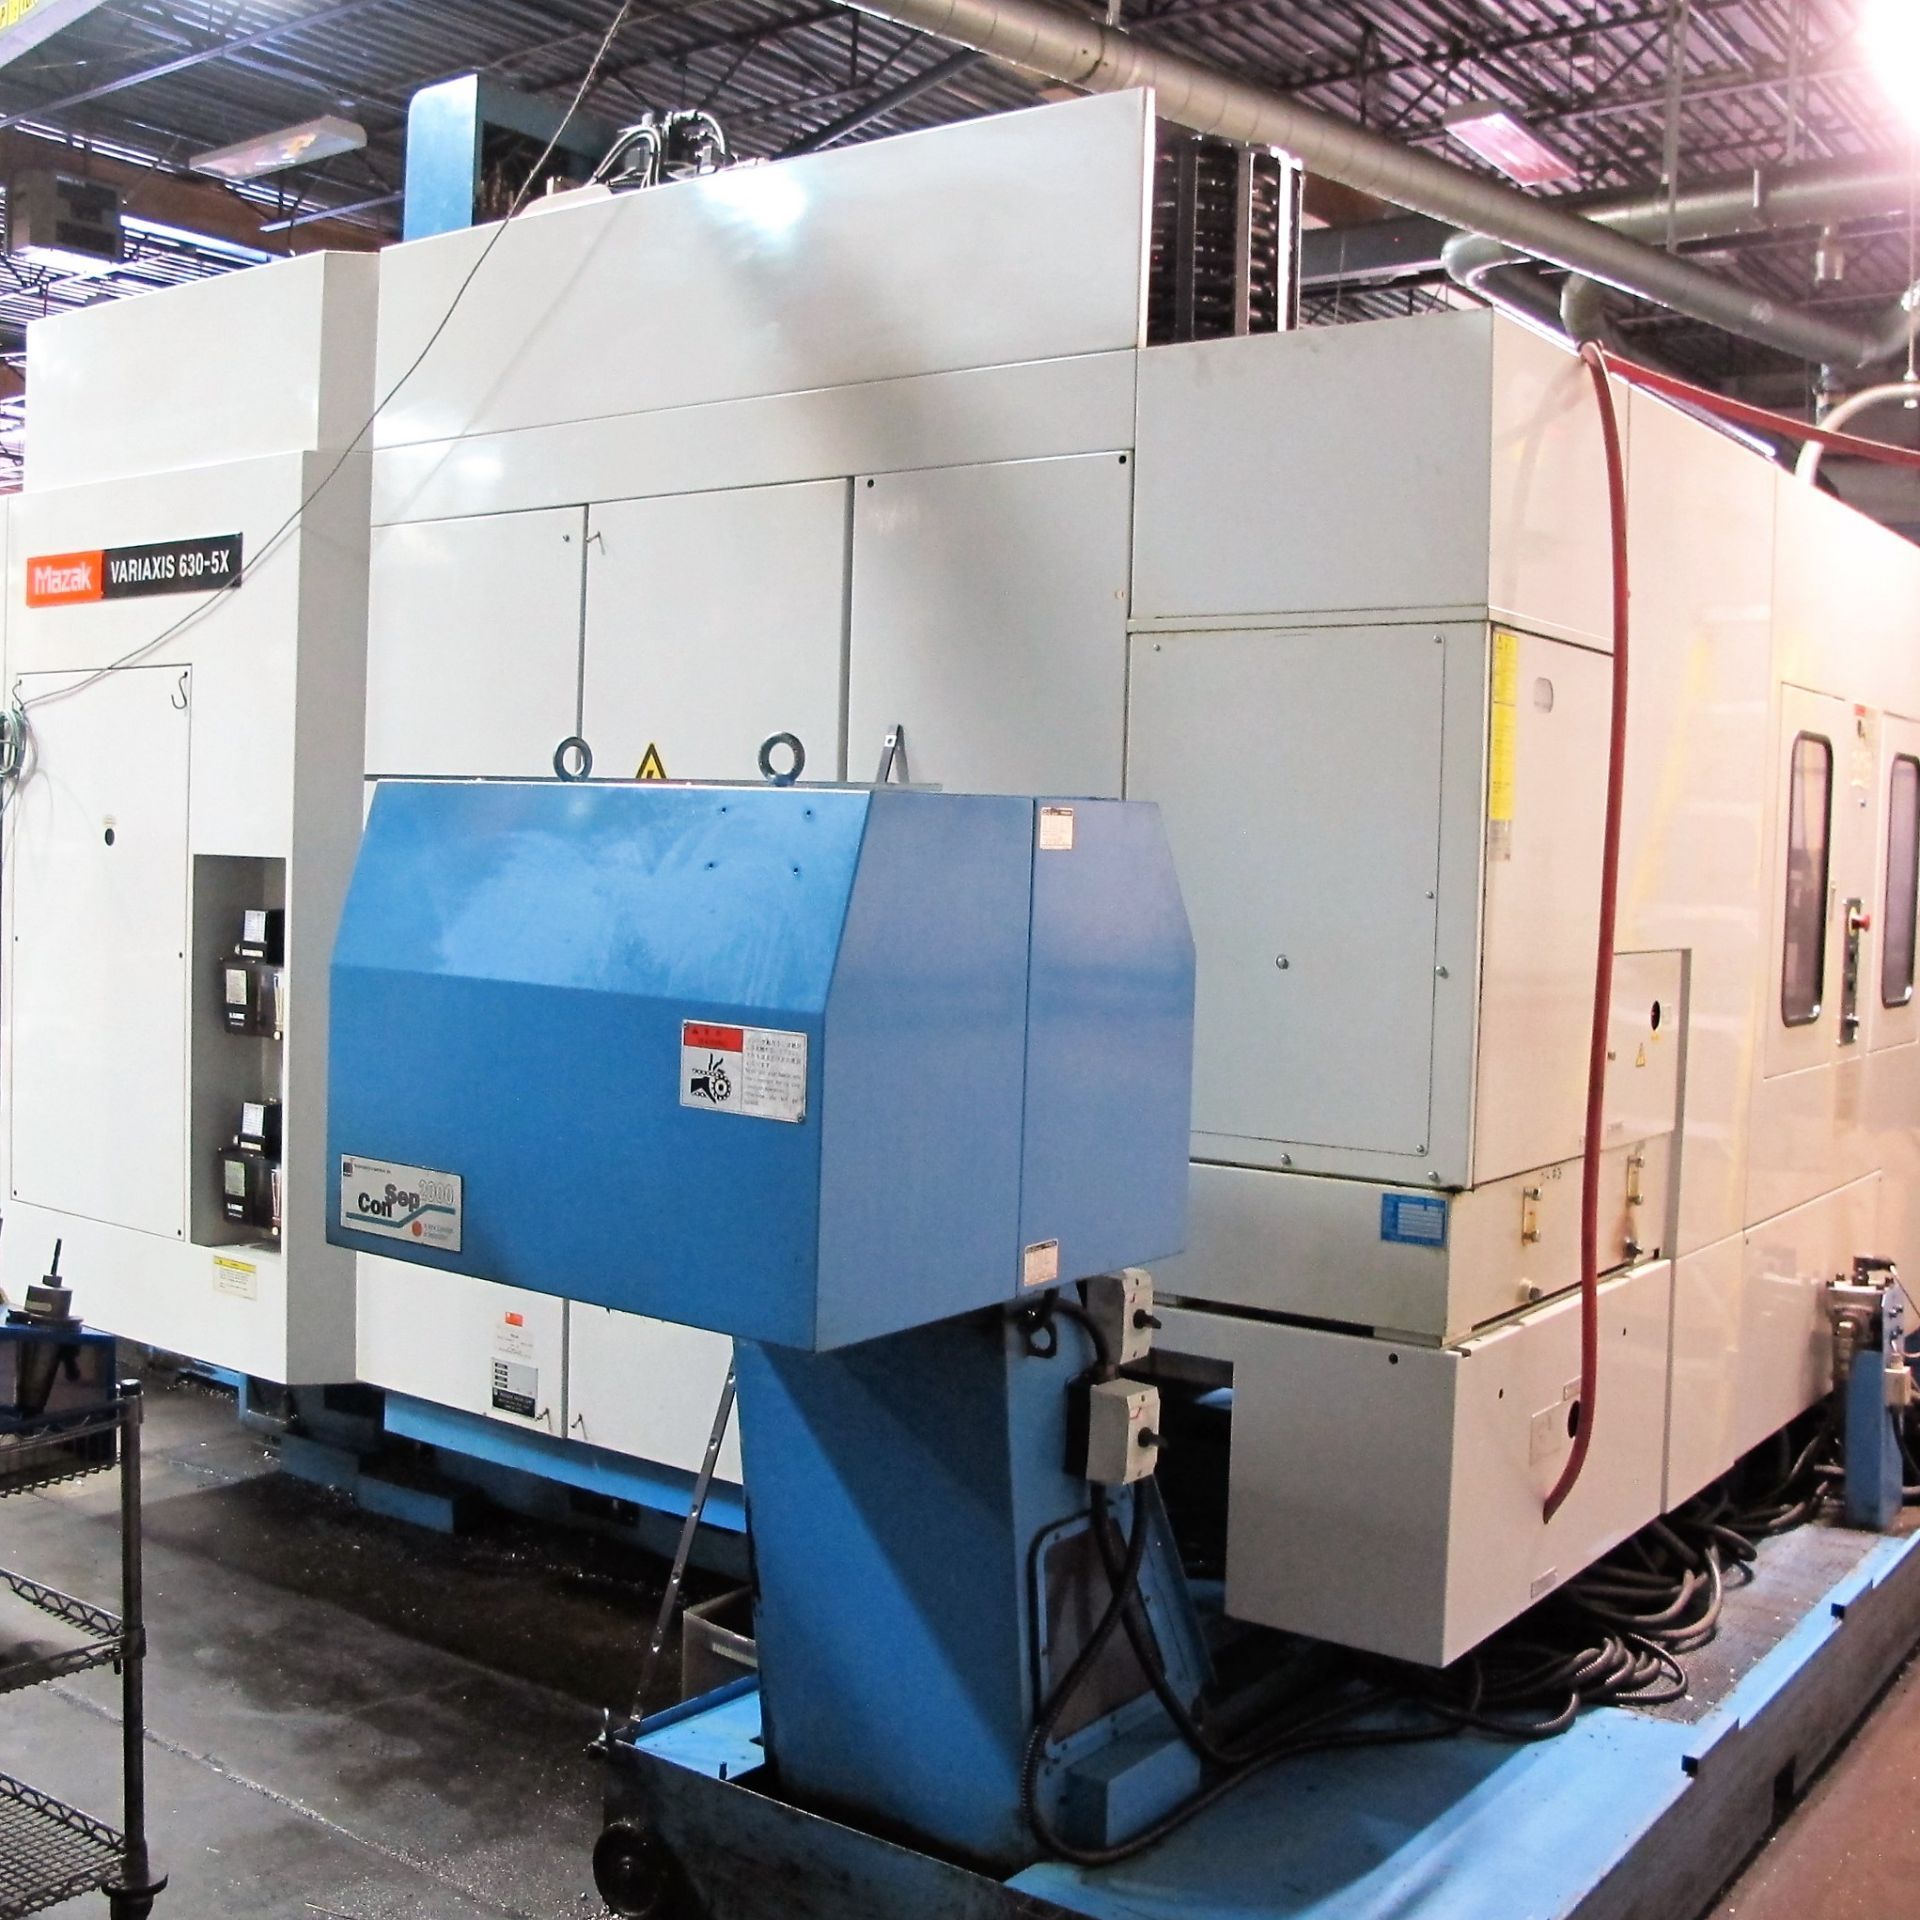 MAZAK VARIAXIS 630-5X CNC 5-AXIS VERTICAL MACHINING CNETER W/PALLET CHANGER - Image 16 of 19